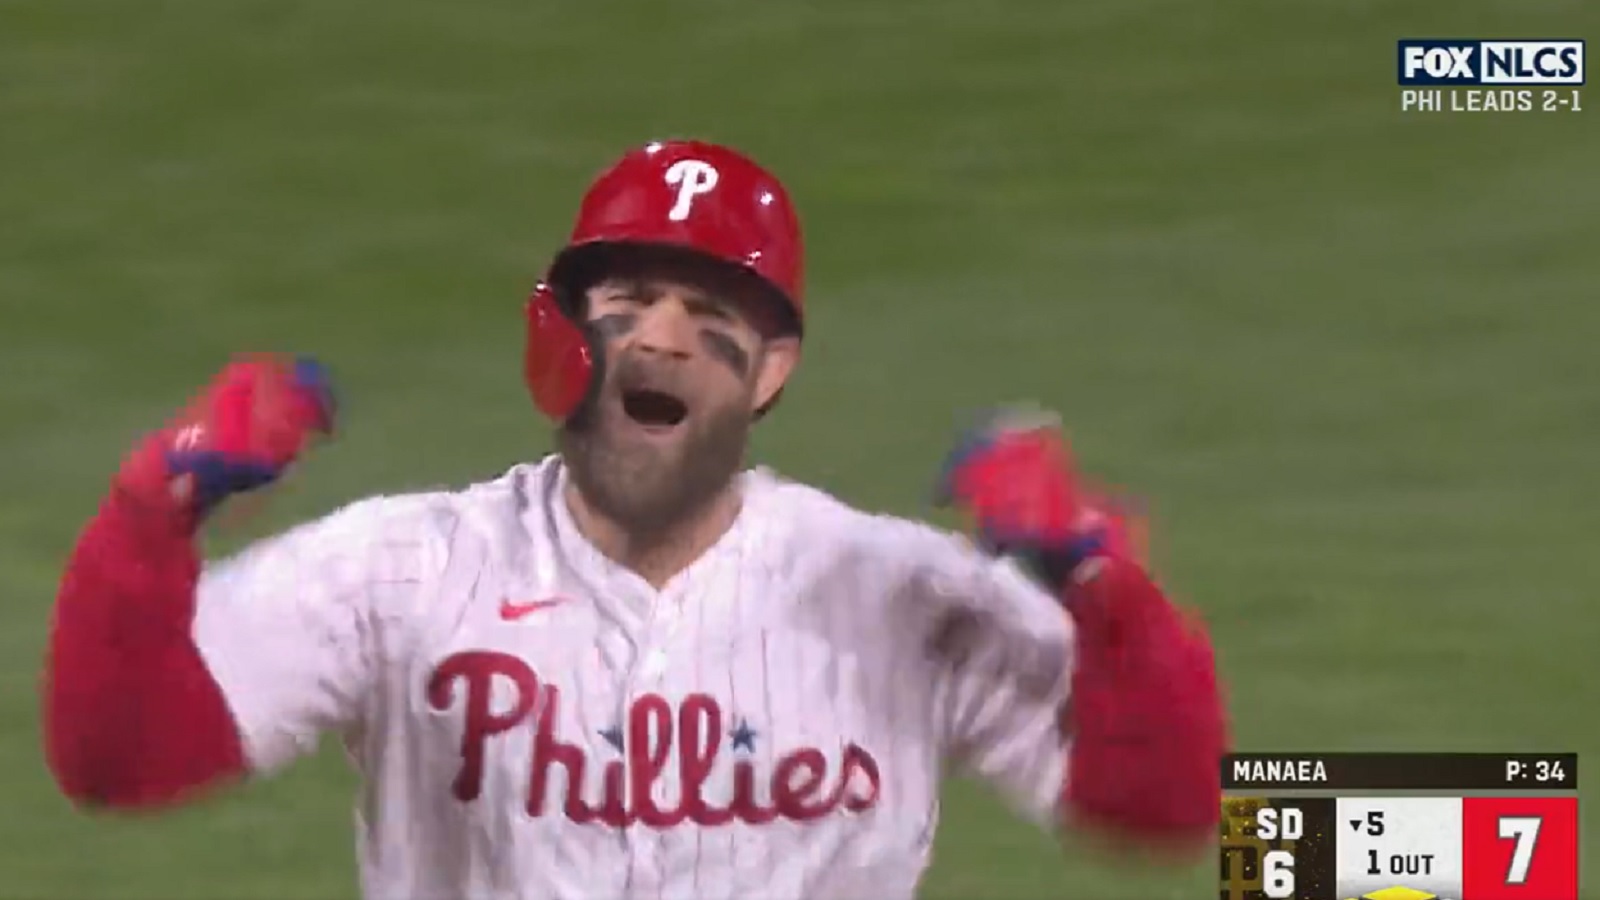 Bryce Harper had fiery message after big hit in Game 4